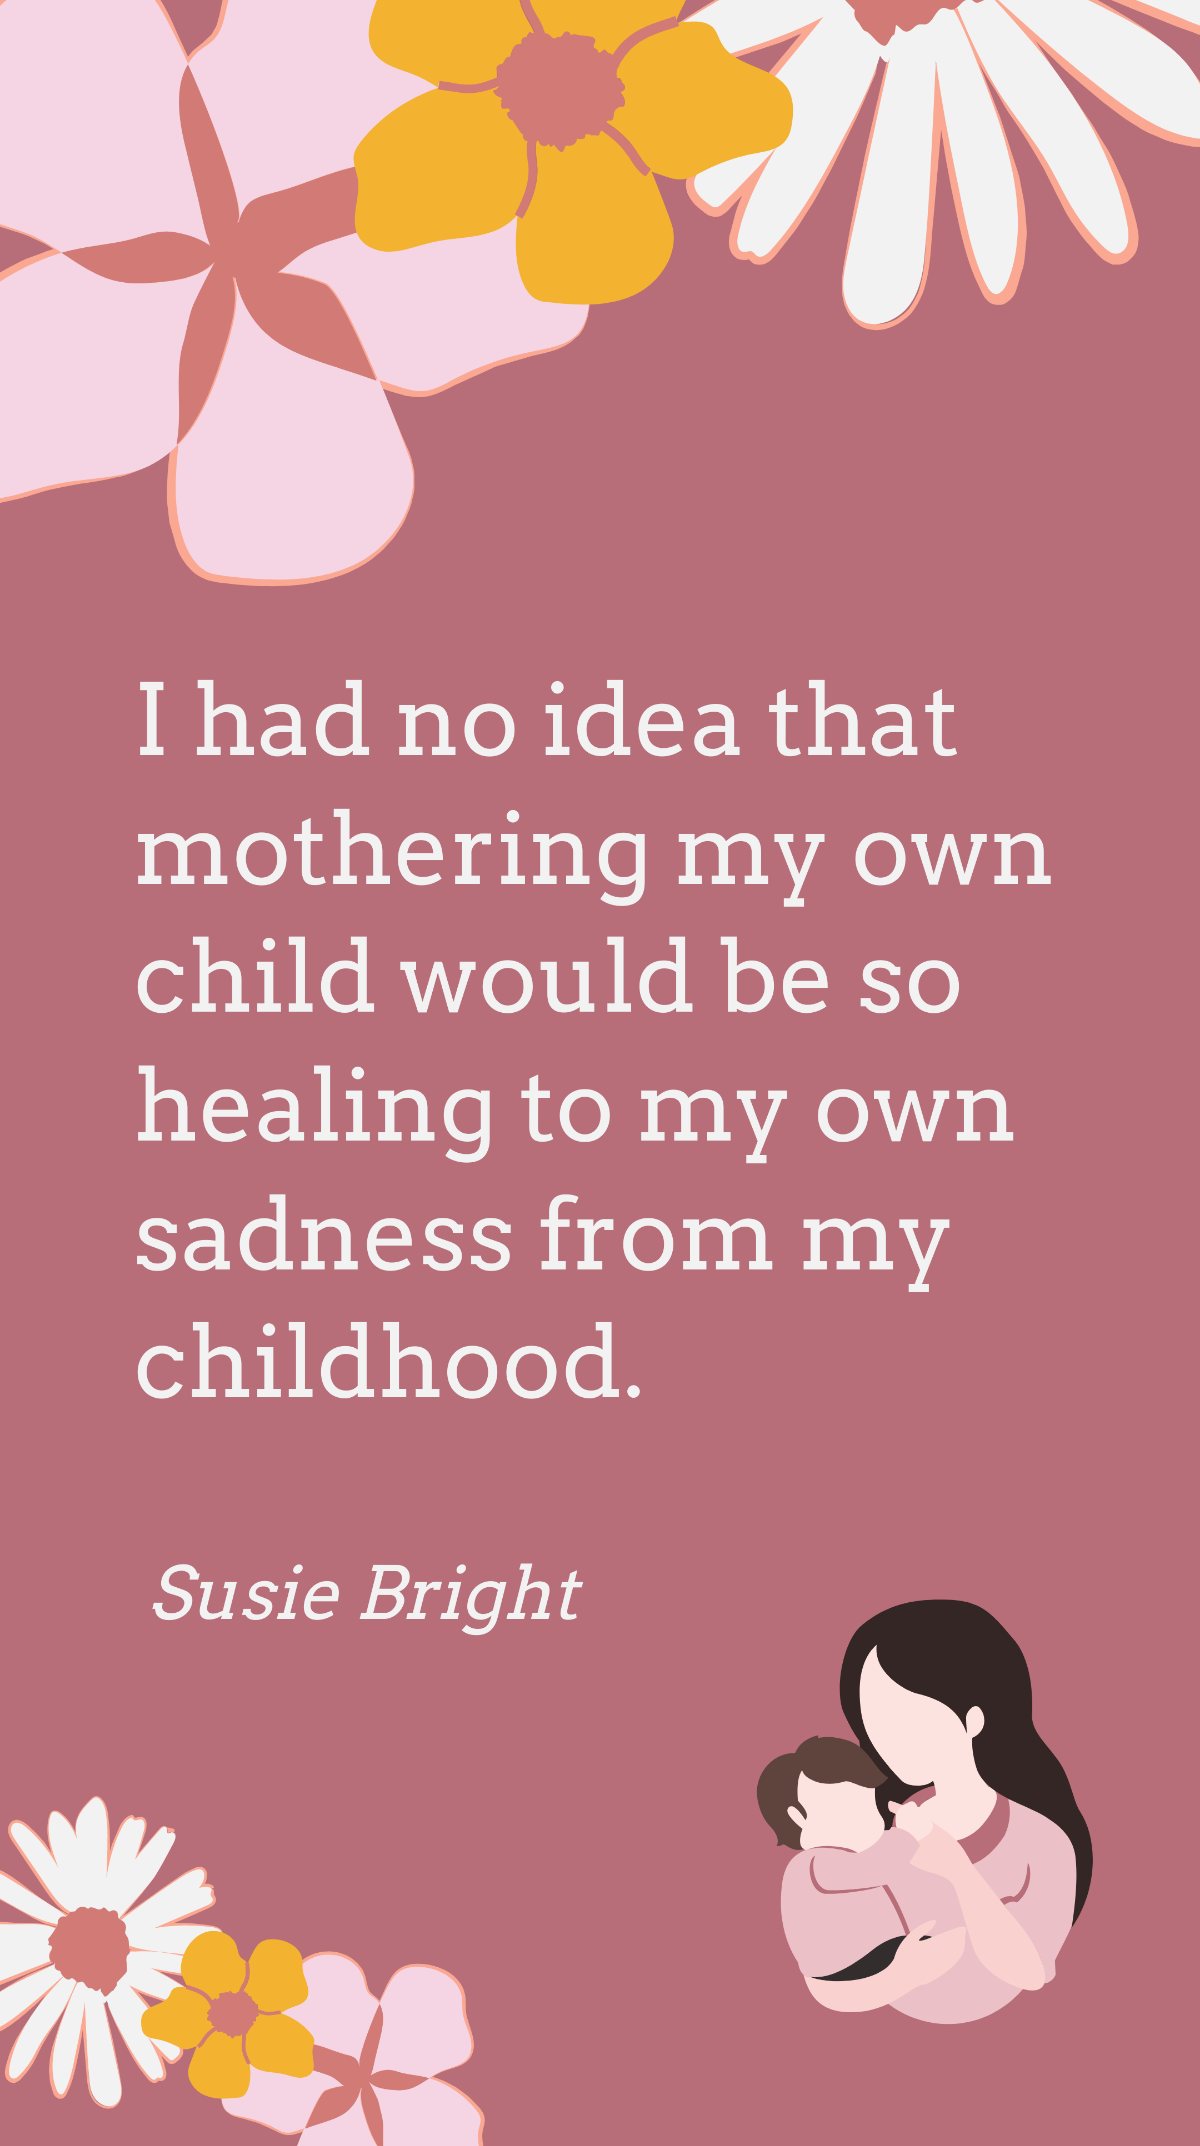 Susie Bright - I had no idea that mothering my own child would be so healing to my own sadness from my childhood. Template